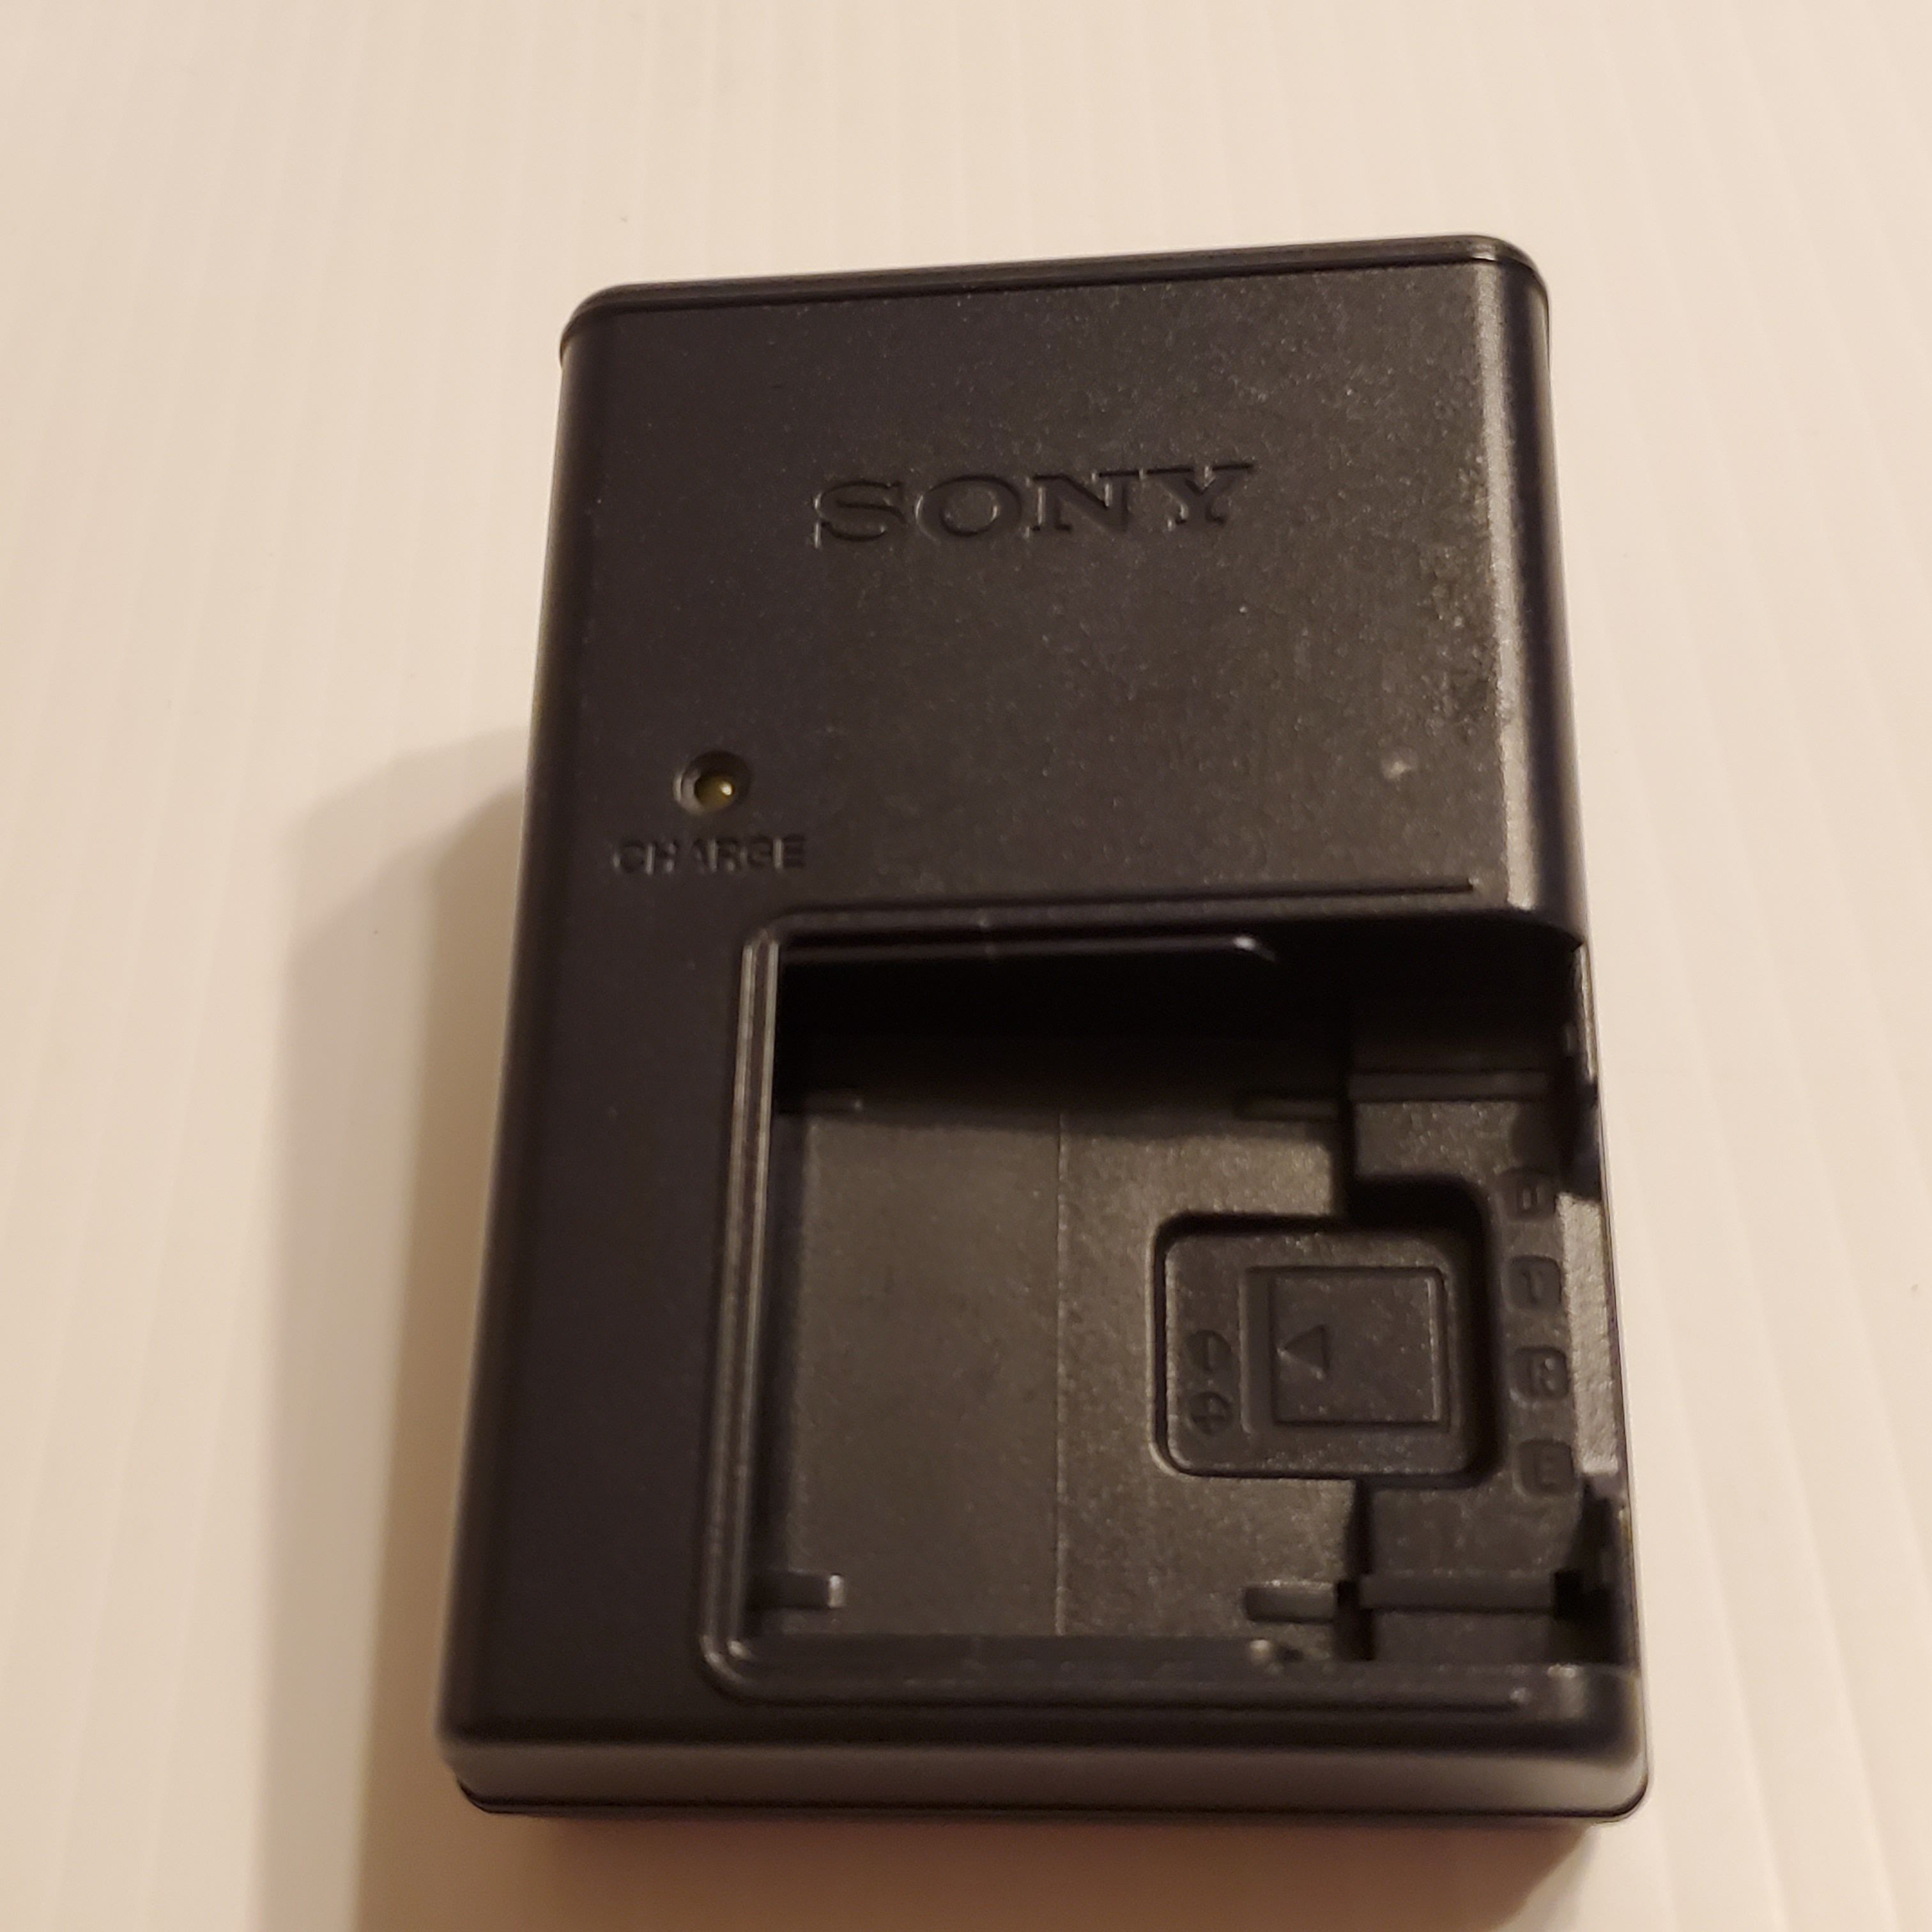 Sony Battery Charger for Cybershot Digital Camera BC-CSD. Pre-owned, in good working and cosmetic shape